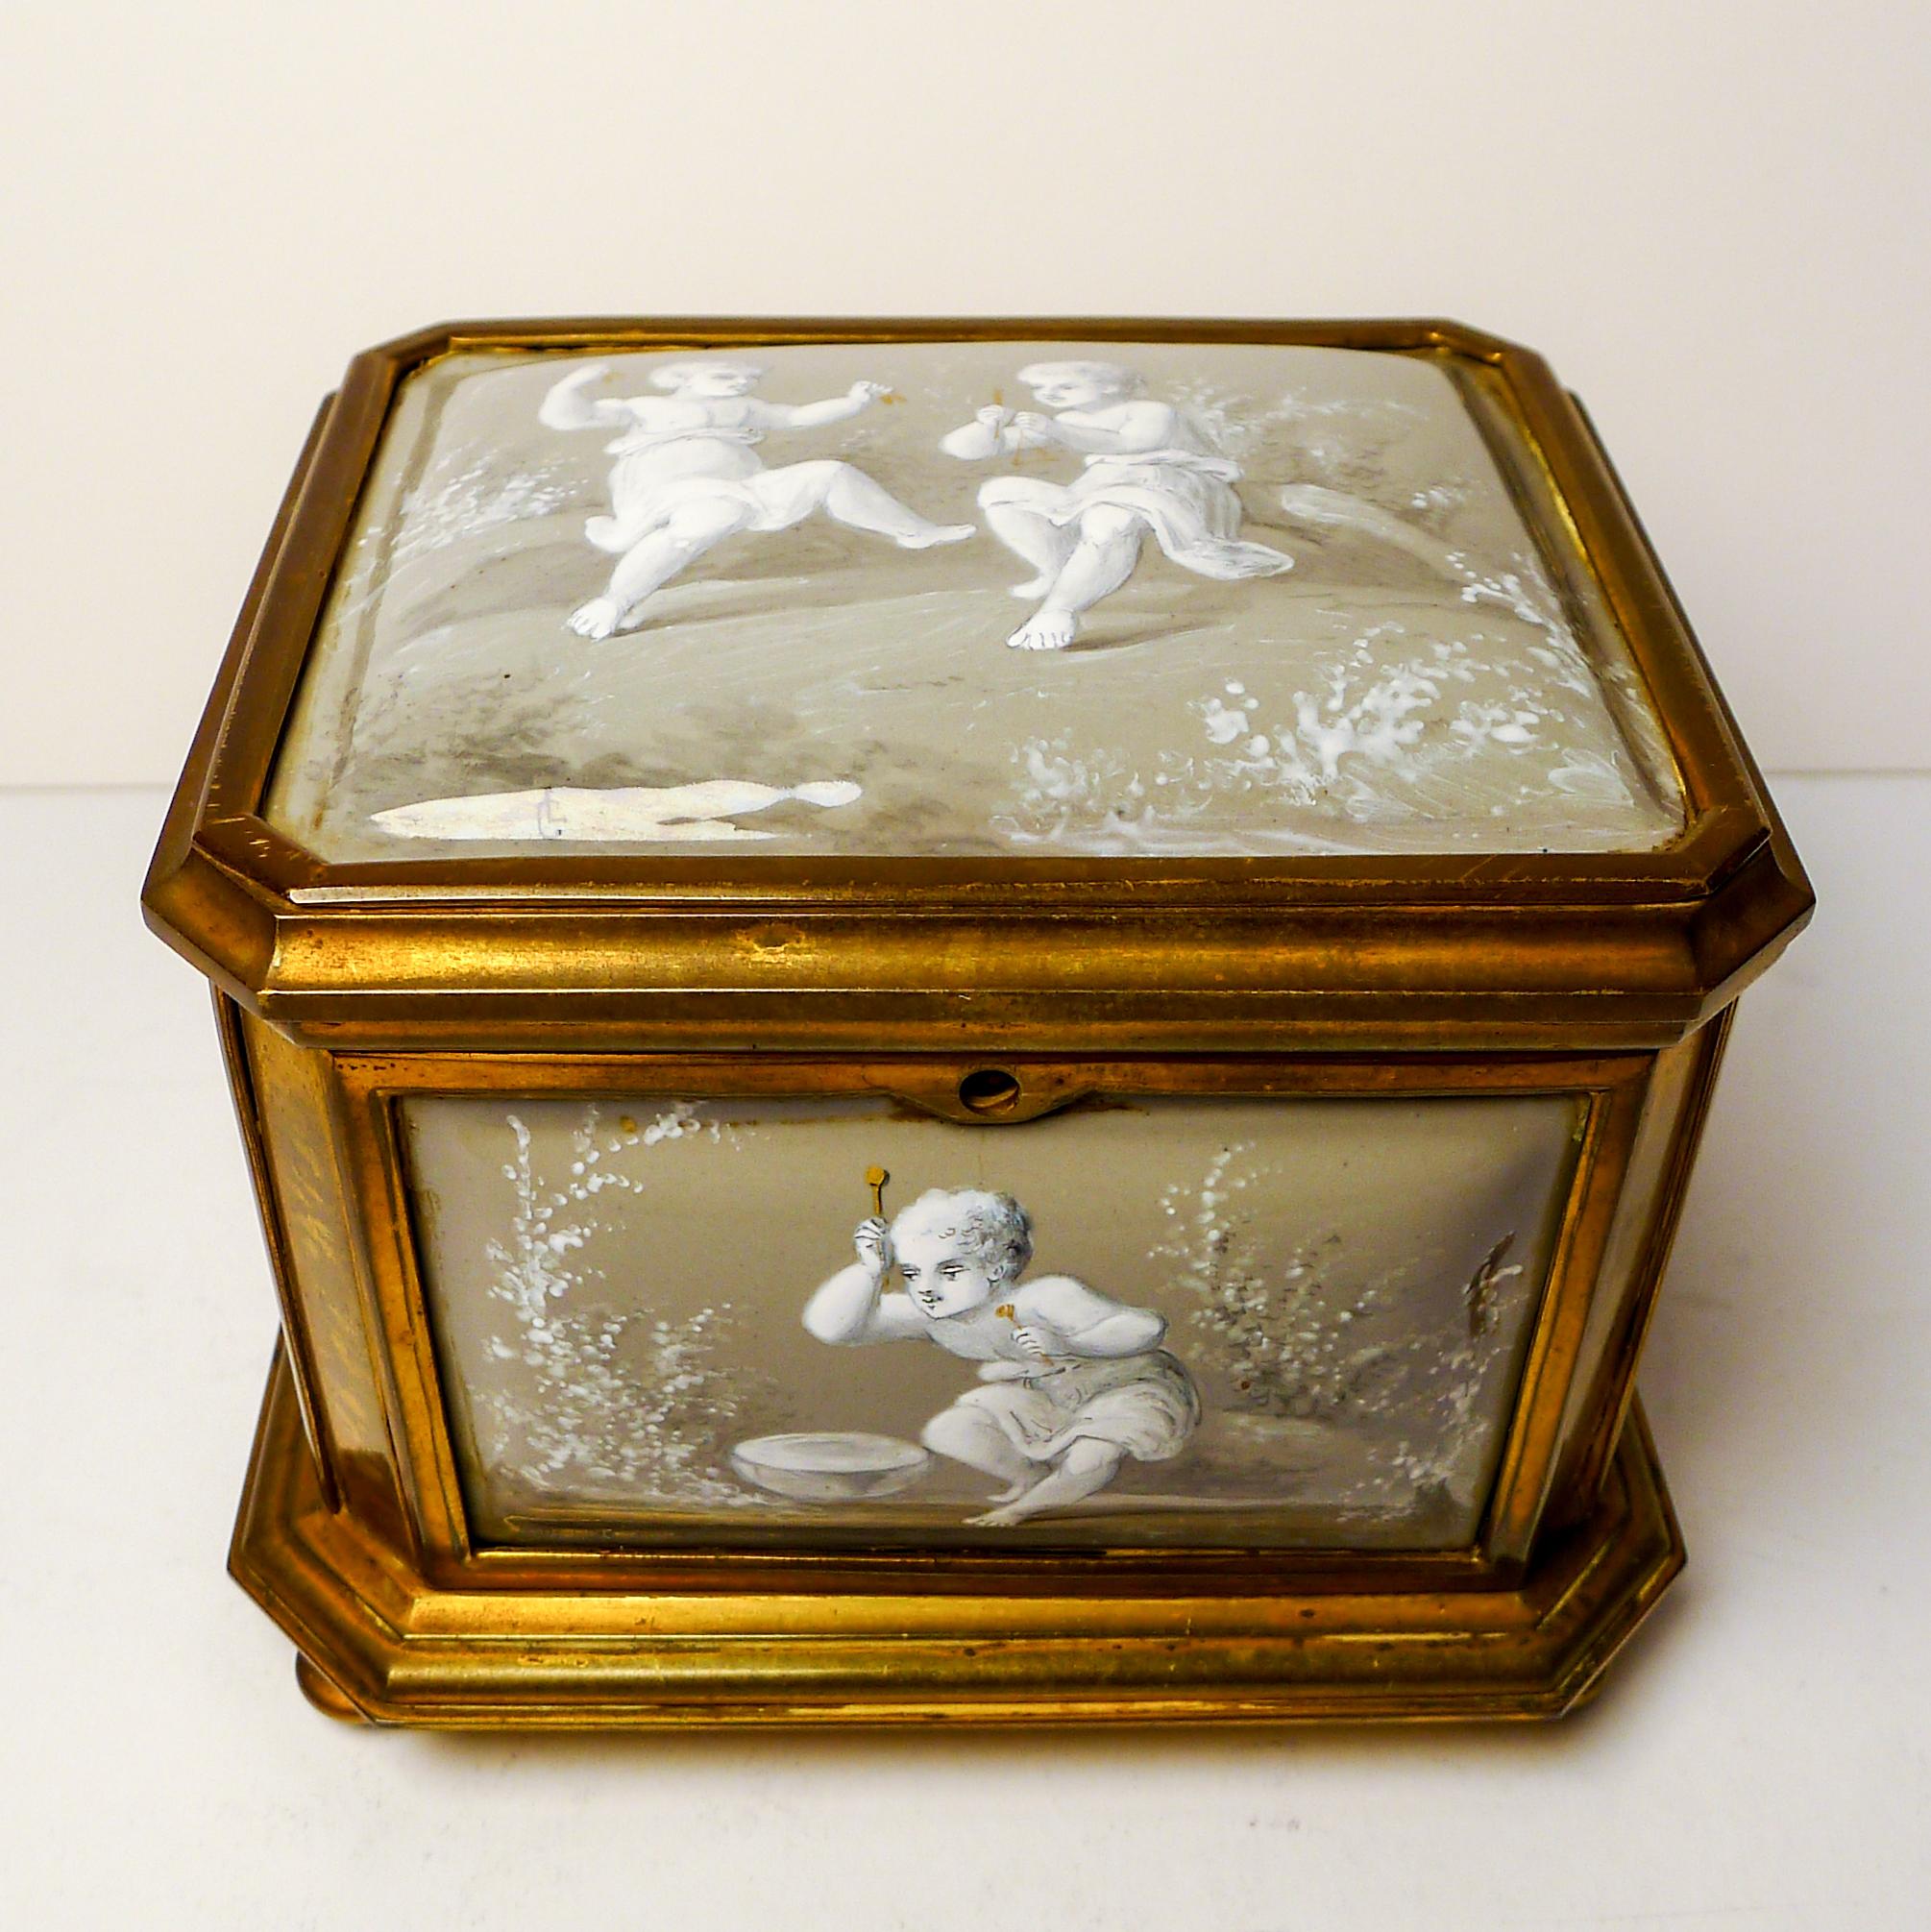 Mid-19th Century Antique French Limoges Enamel Jewelry Box C.1850 For Sale